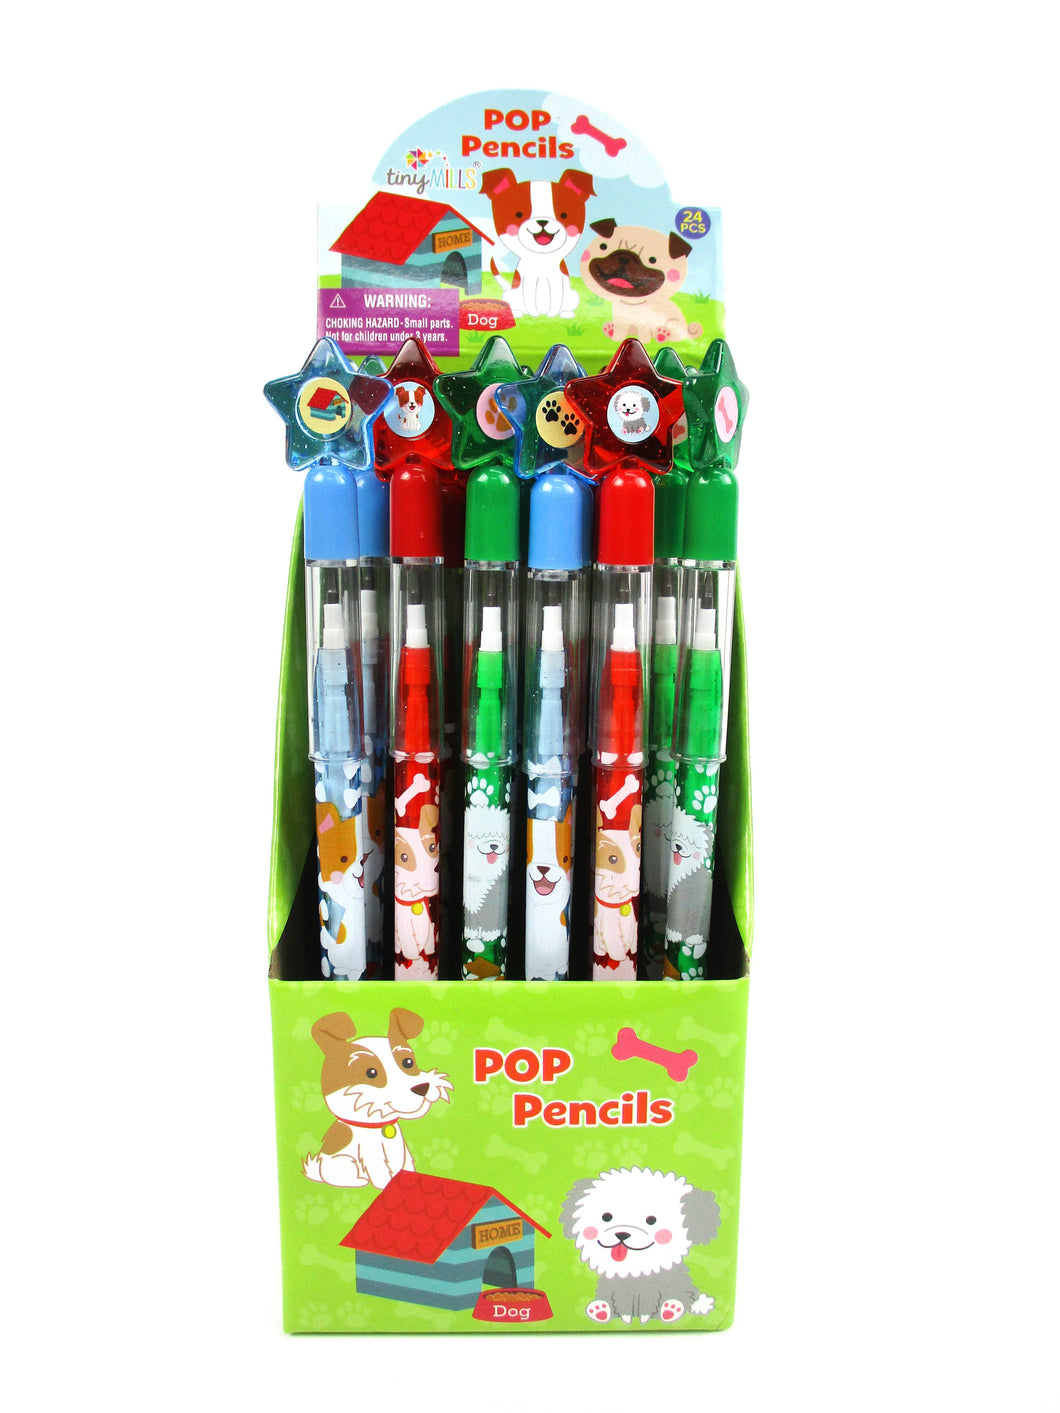 Dogs Puppies Multi Point Pencils